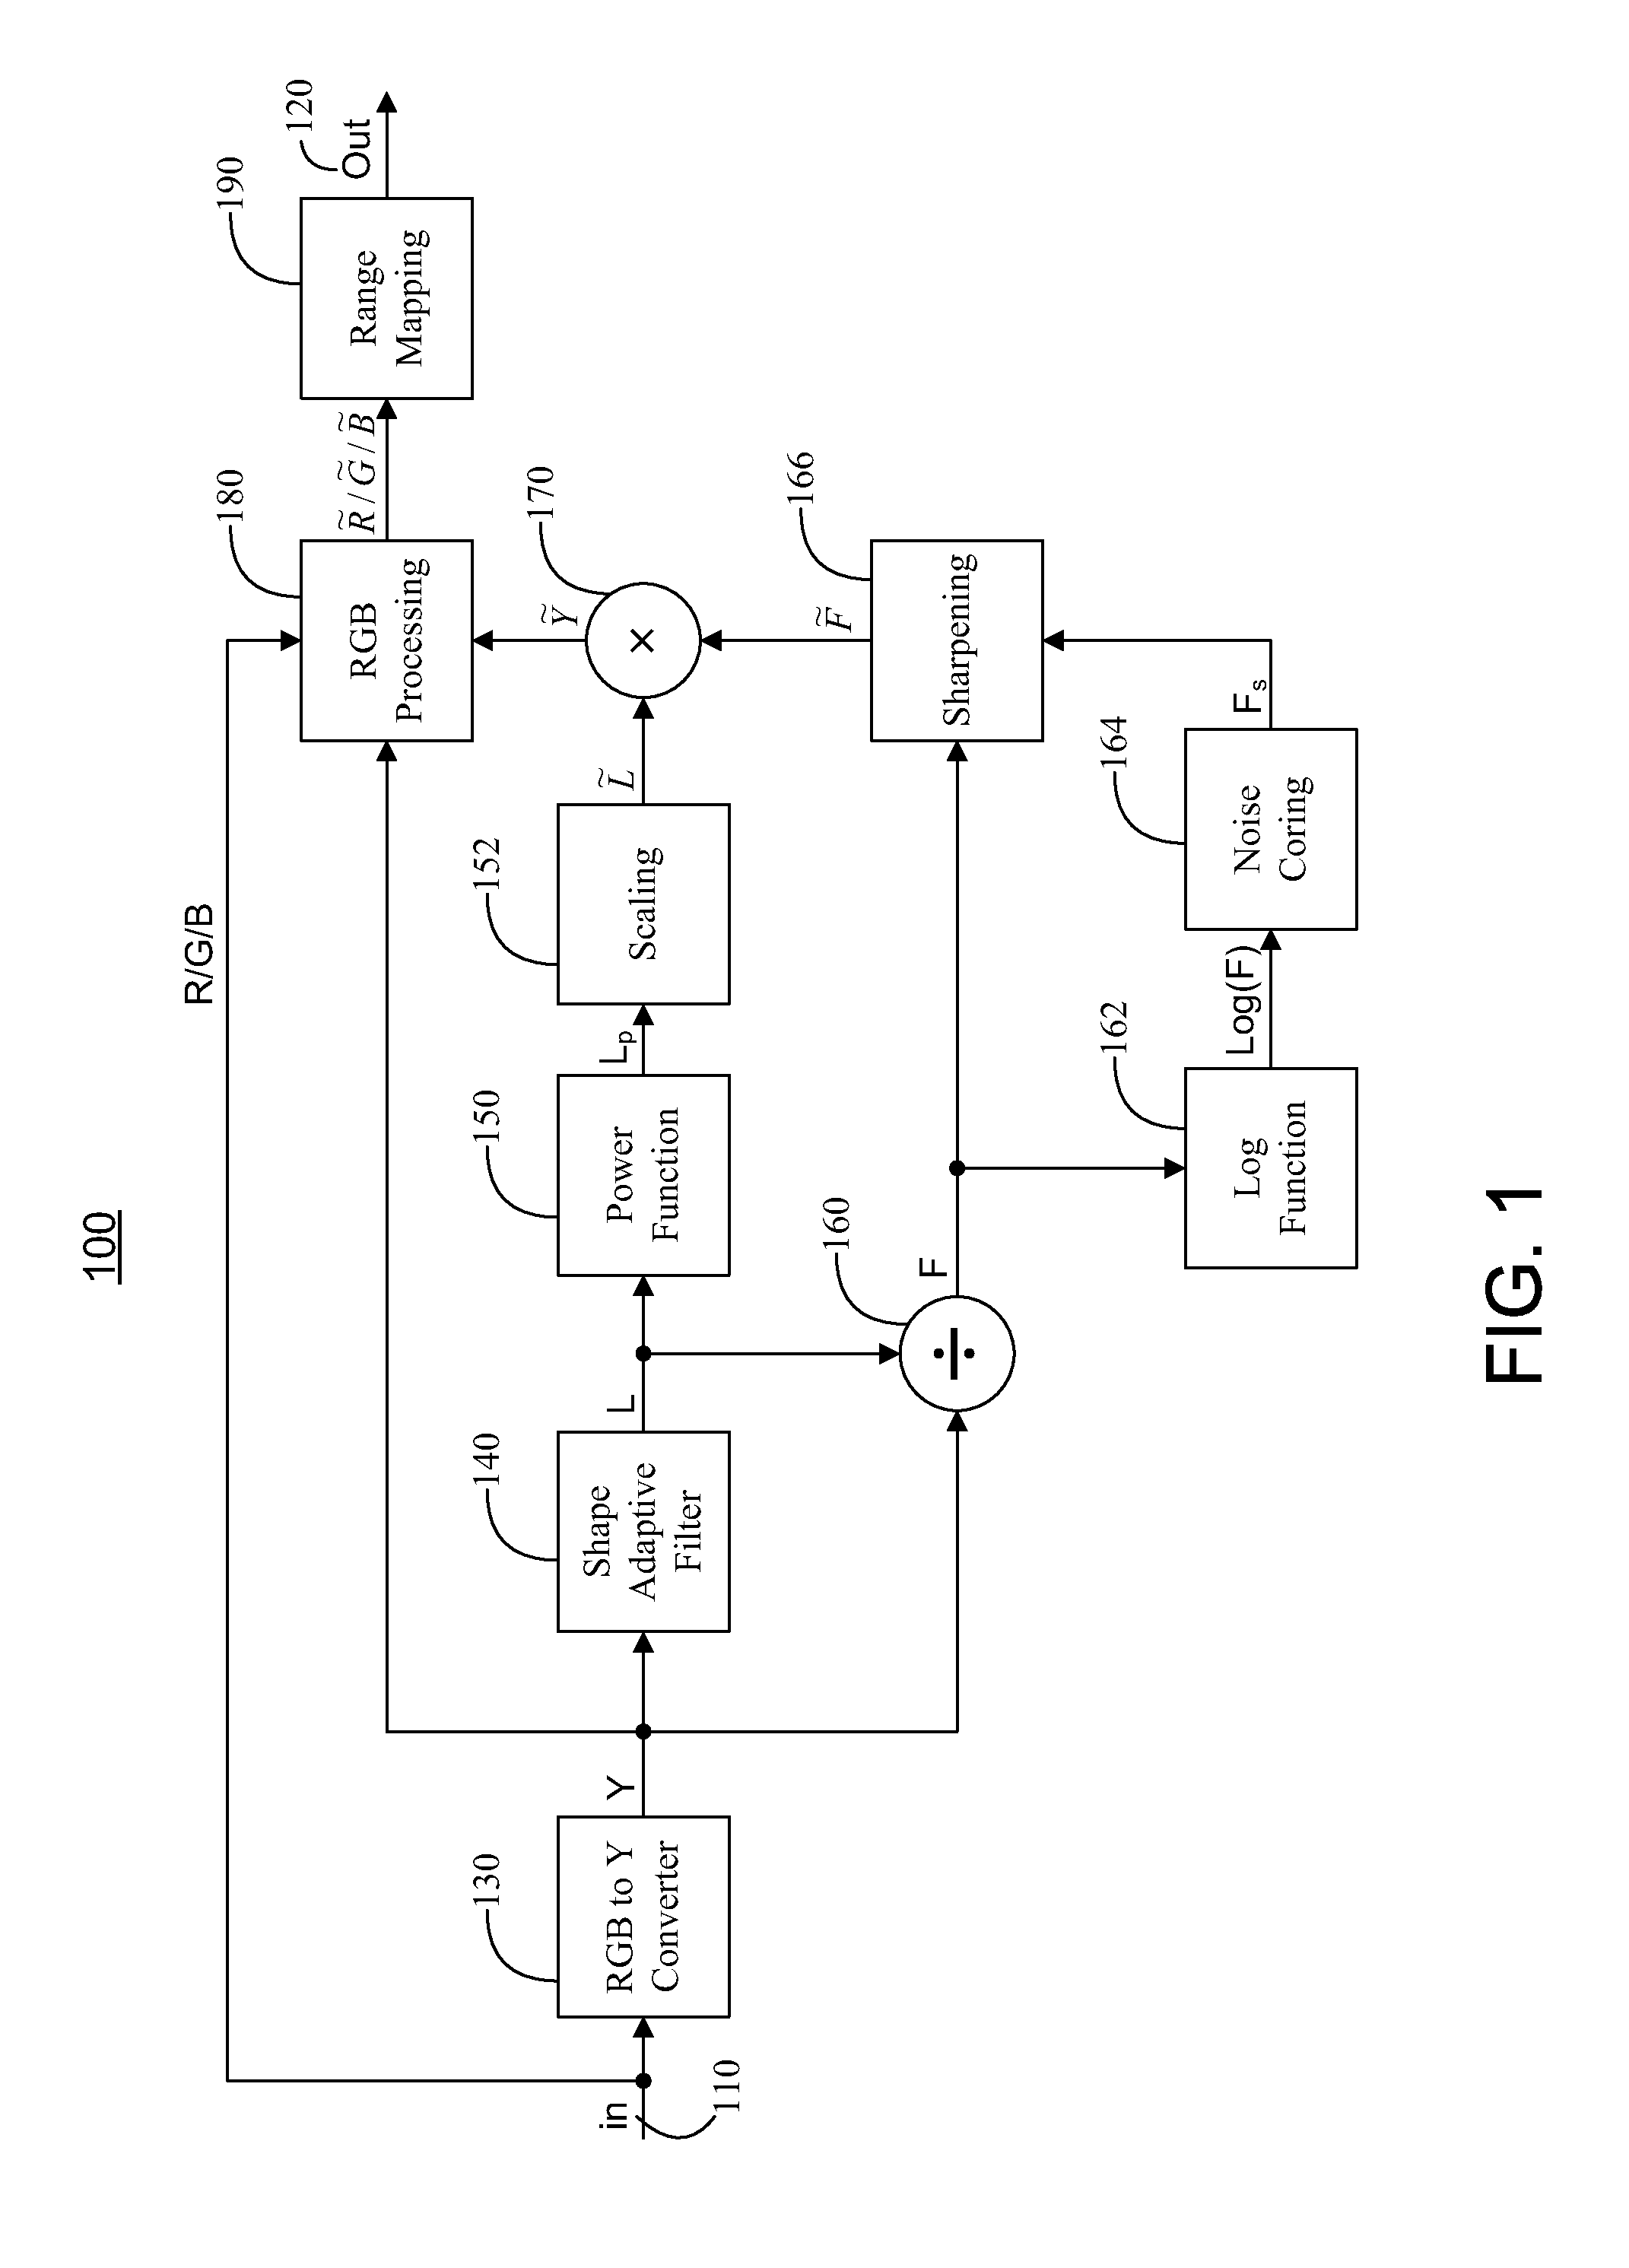 Systems and methods for local tone mapping of high dynamic range images